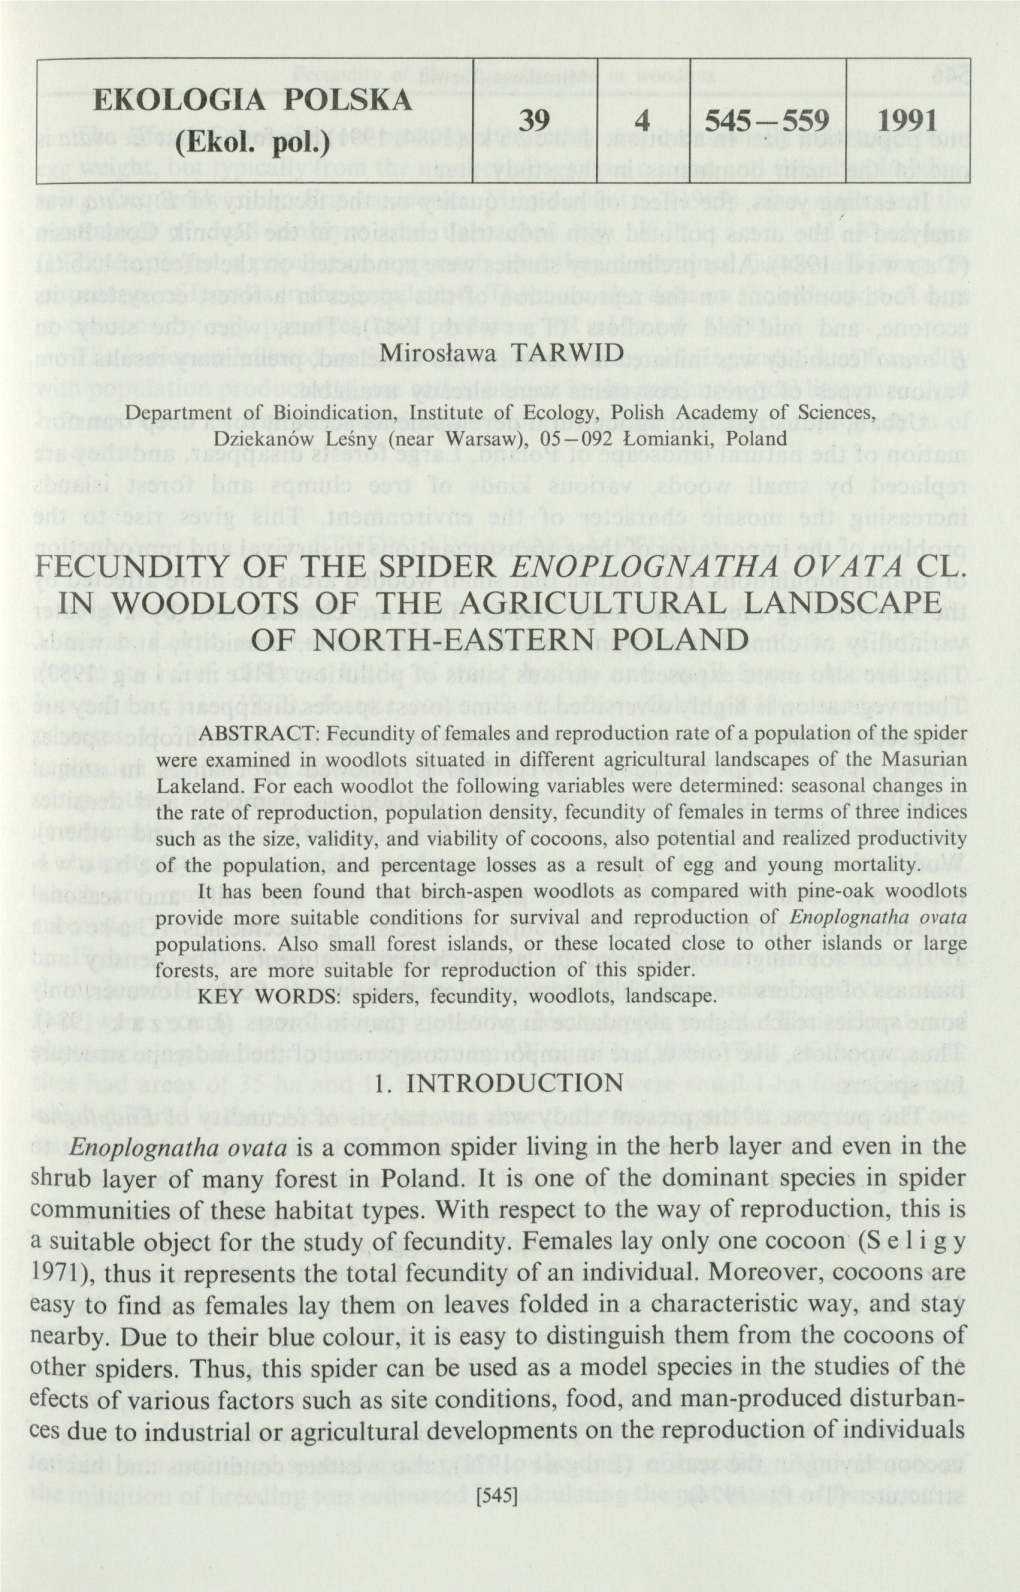 Fecundity of the Spider Enoplognatha Ovata Cl. in Woodlots of the Agricultural Landscape of North-Eastern Poland